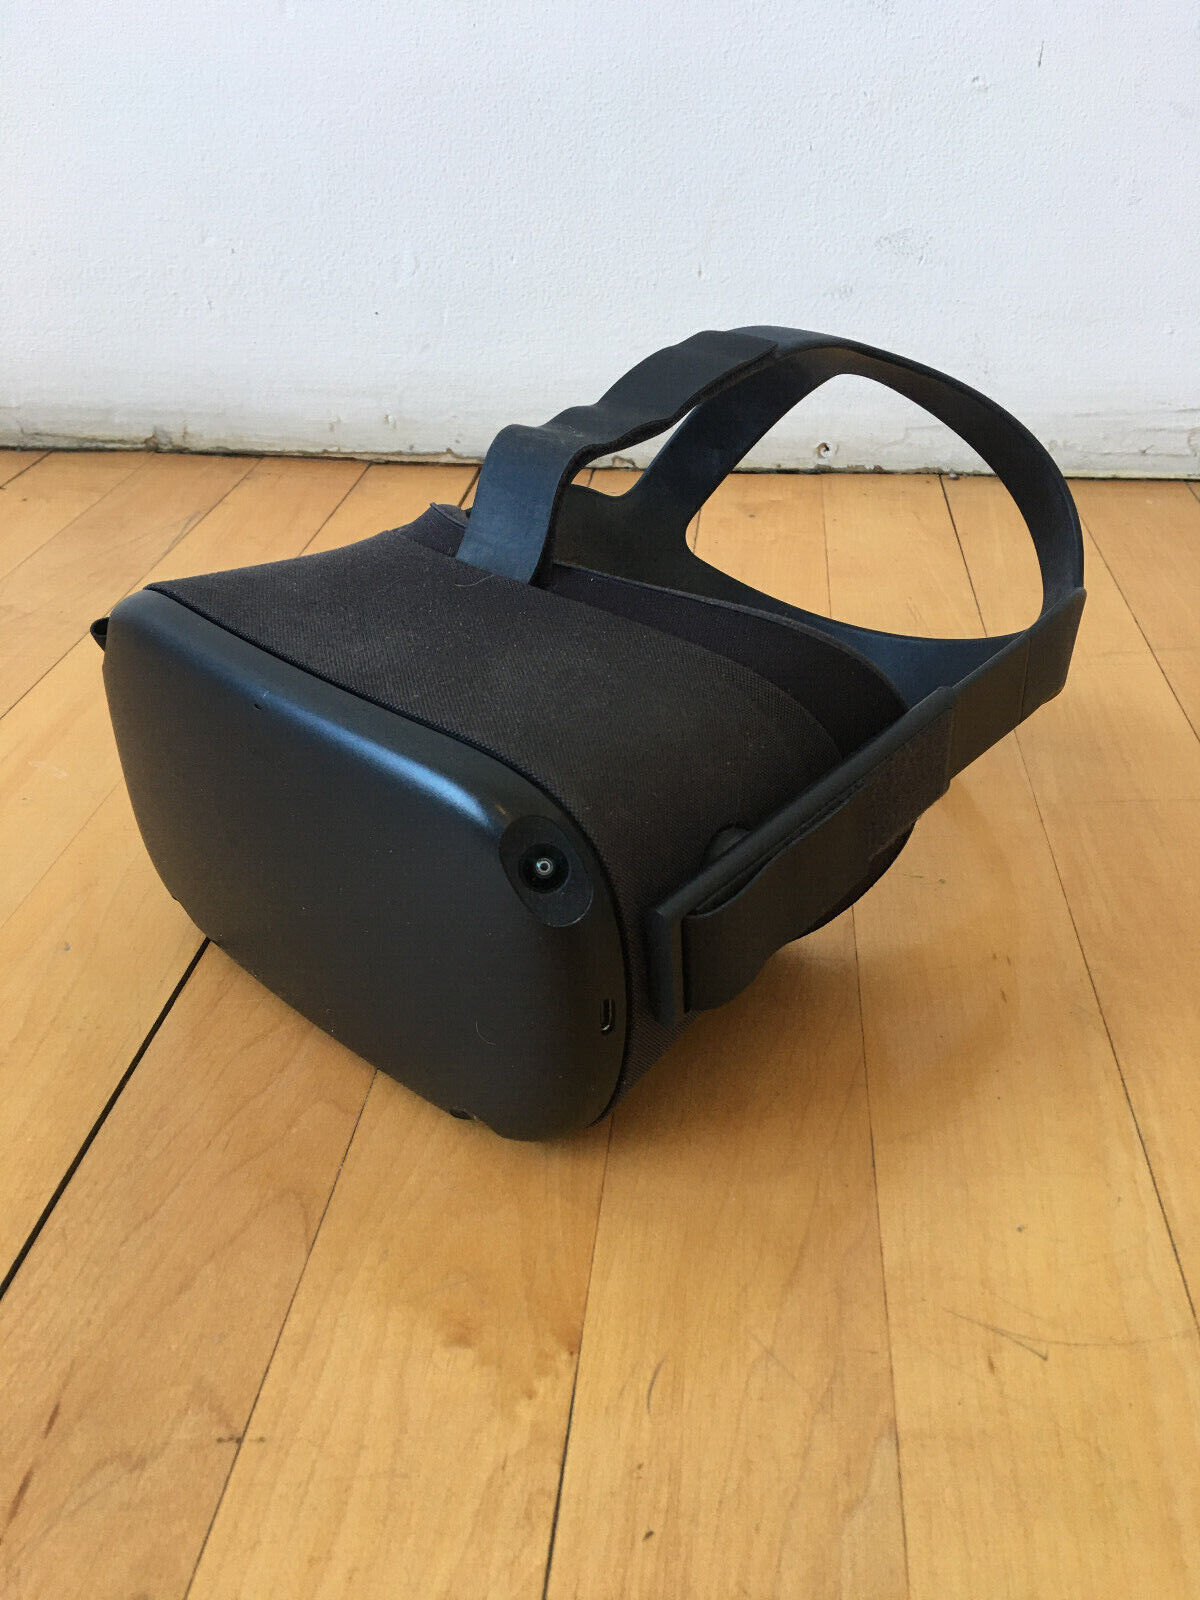 Oculus Quest 1 64GB VR Headset Only (w case, charger & cable) - NO Controllers